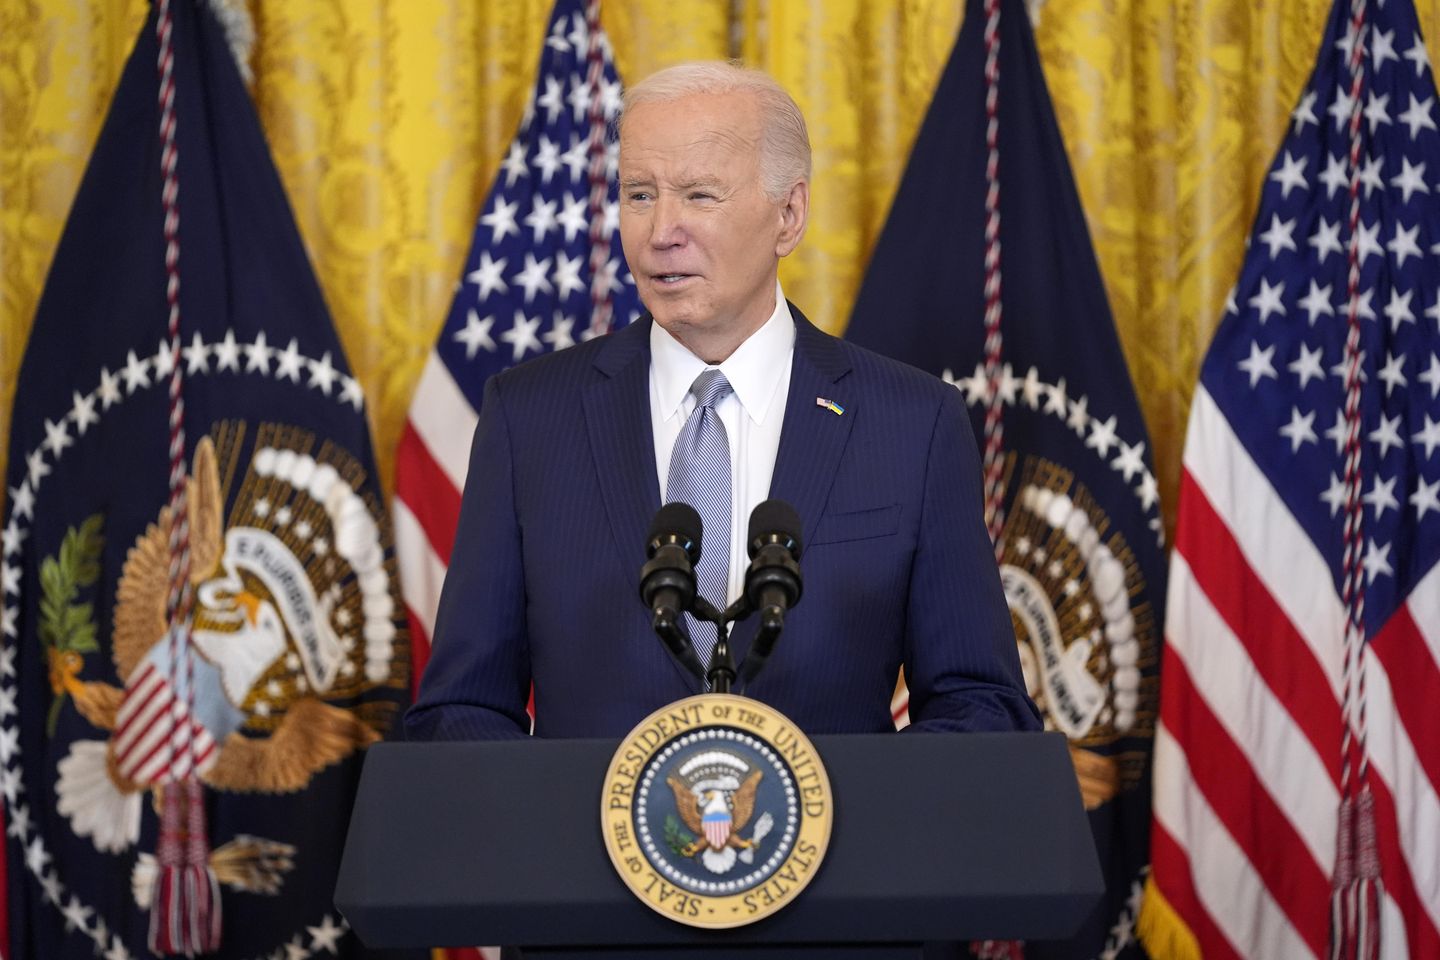 Biden summons congressional leaders to the White House